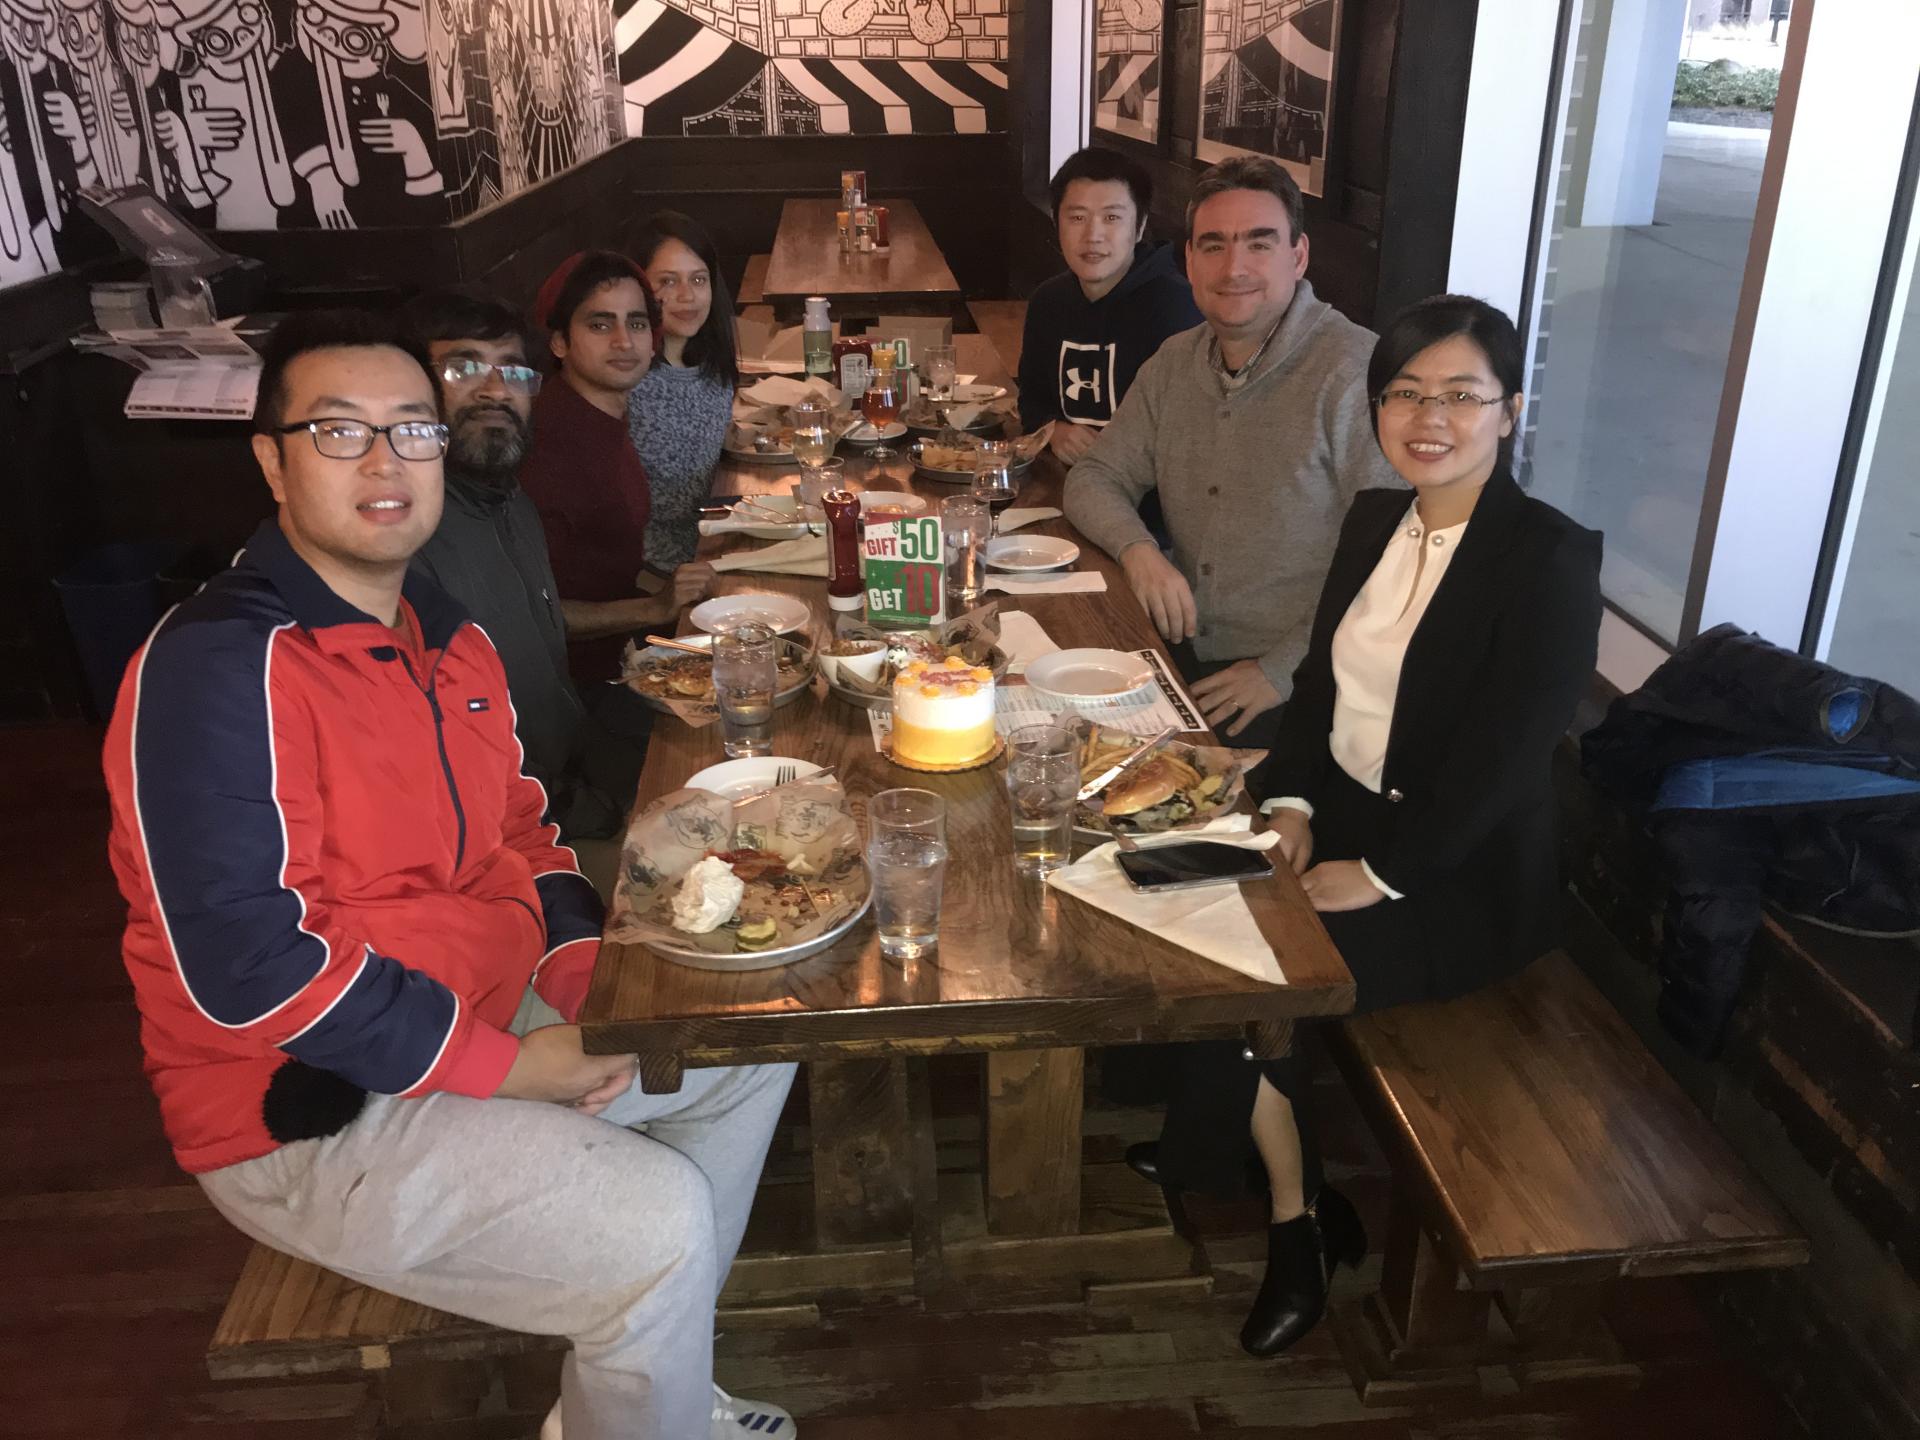 Farewell party for Fujuan, Lincoln, December 2019